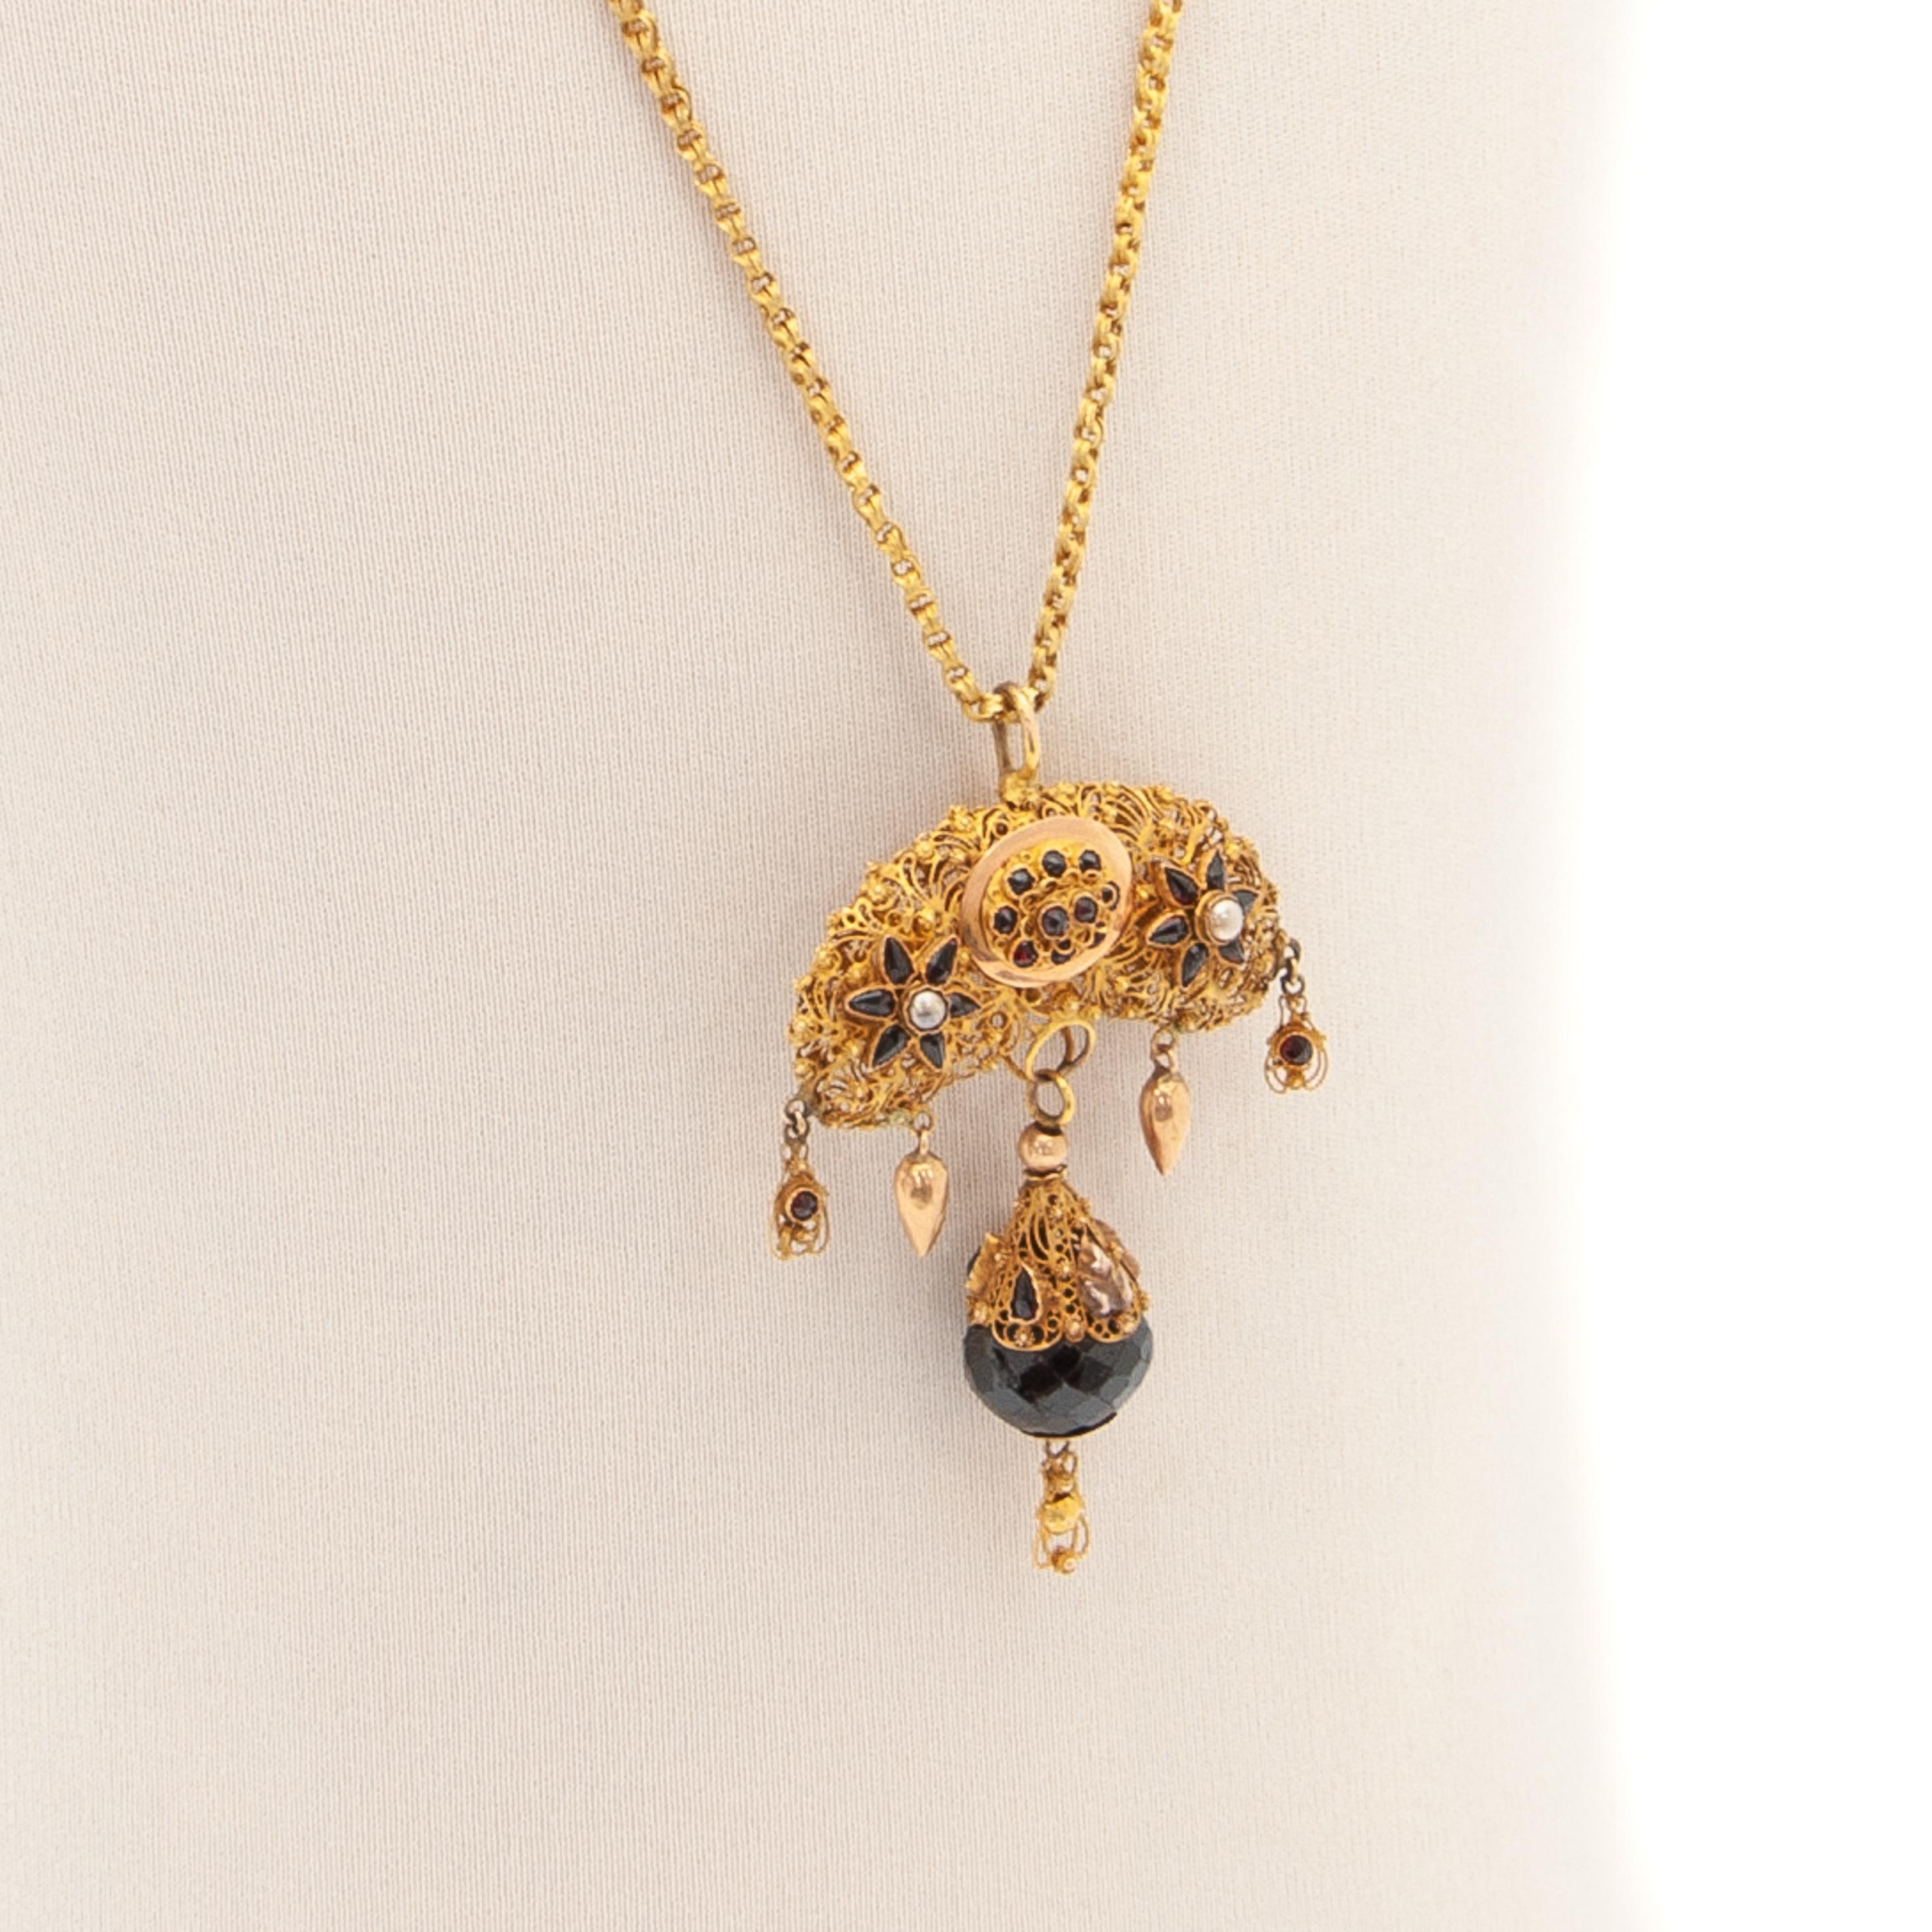 A beautiful antique pendant necklace of the late 19th century and handmade in the Netherlands. The pendant is created in 14 karat yellow gold and made of fine filigree and cannetille work set with garnets and seed pearls. The craftsmanship of this